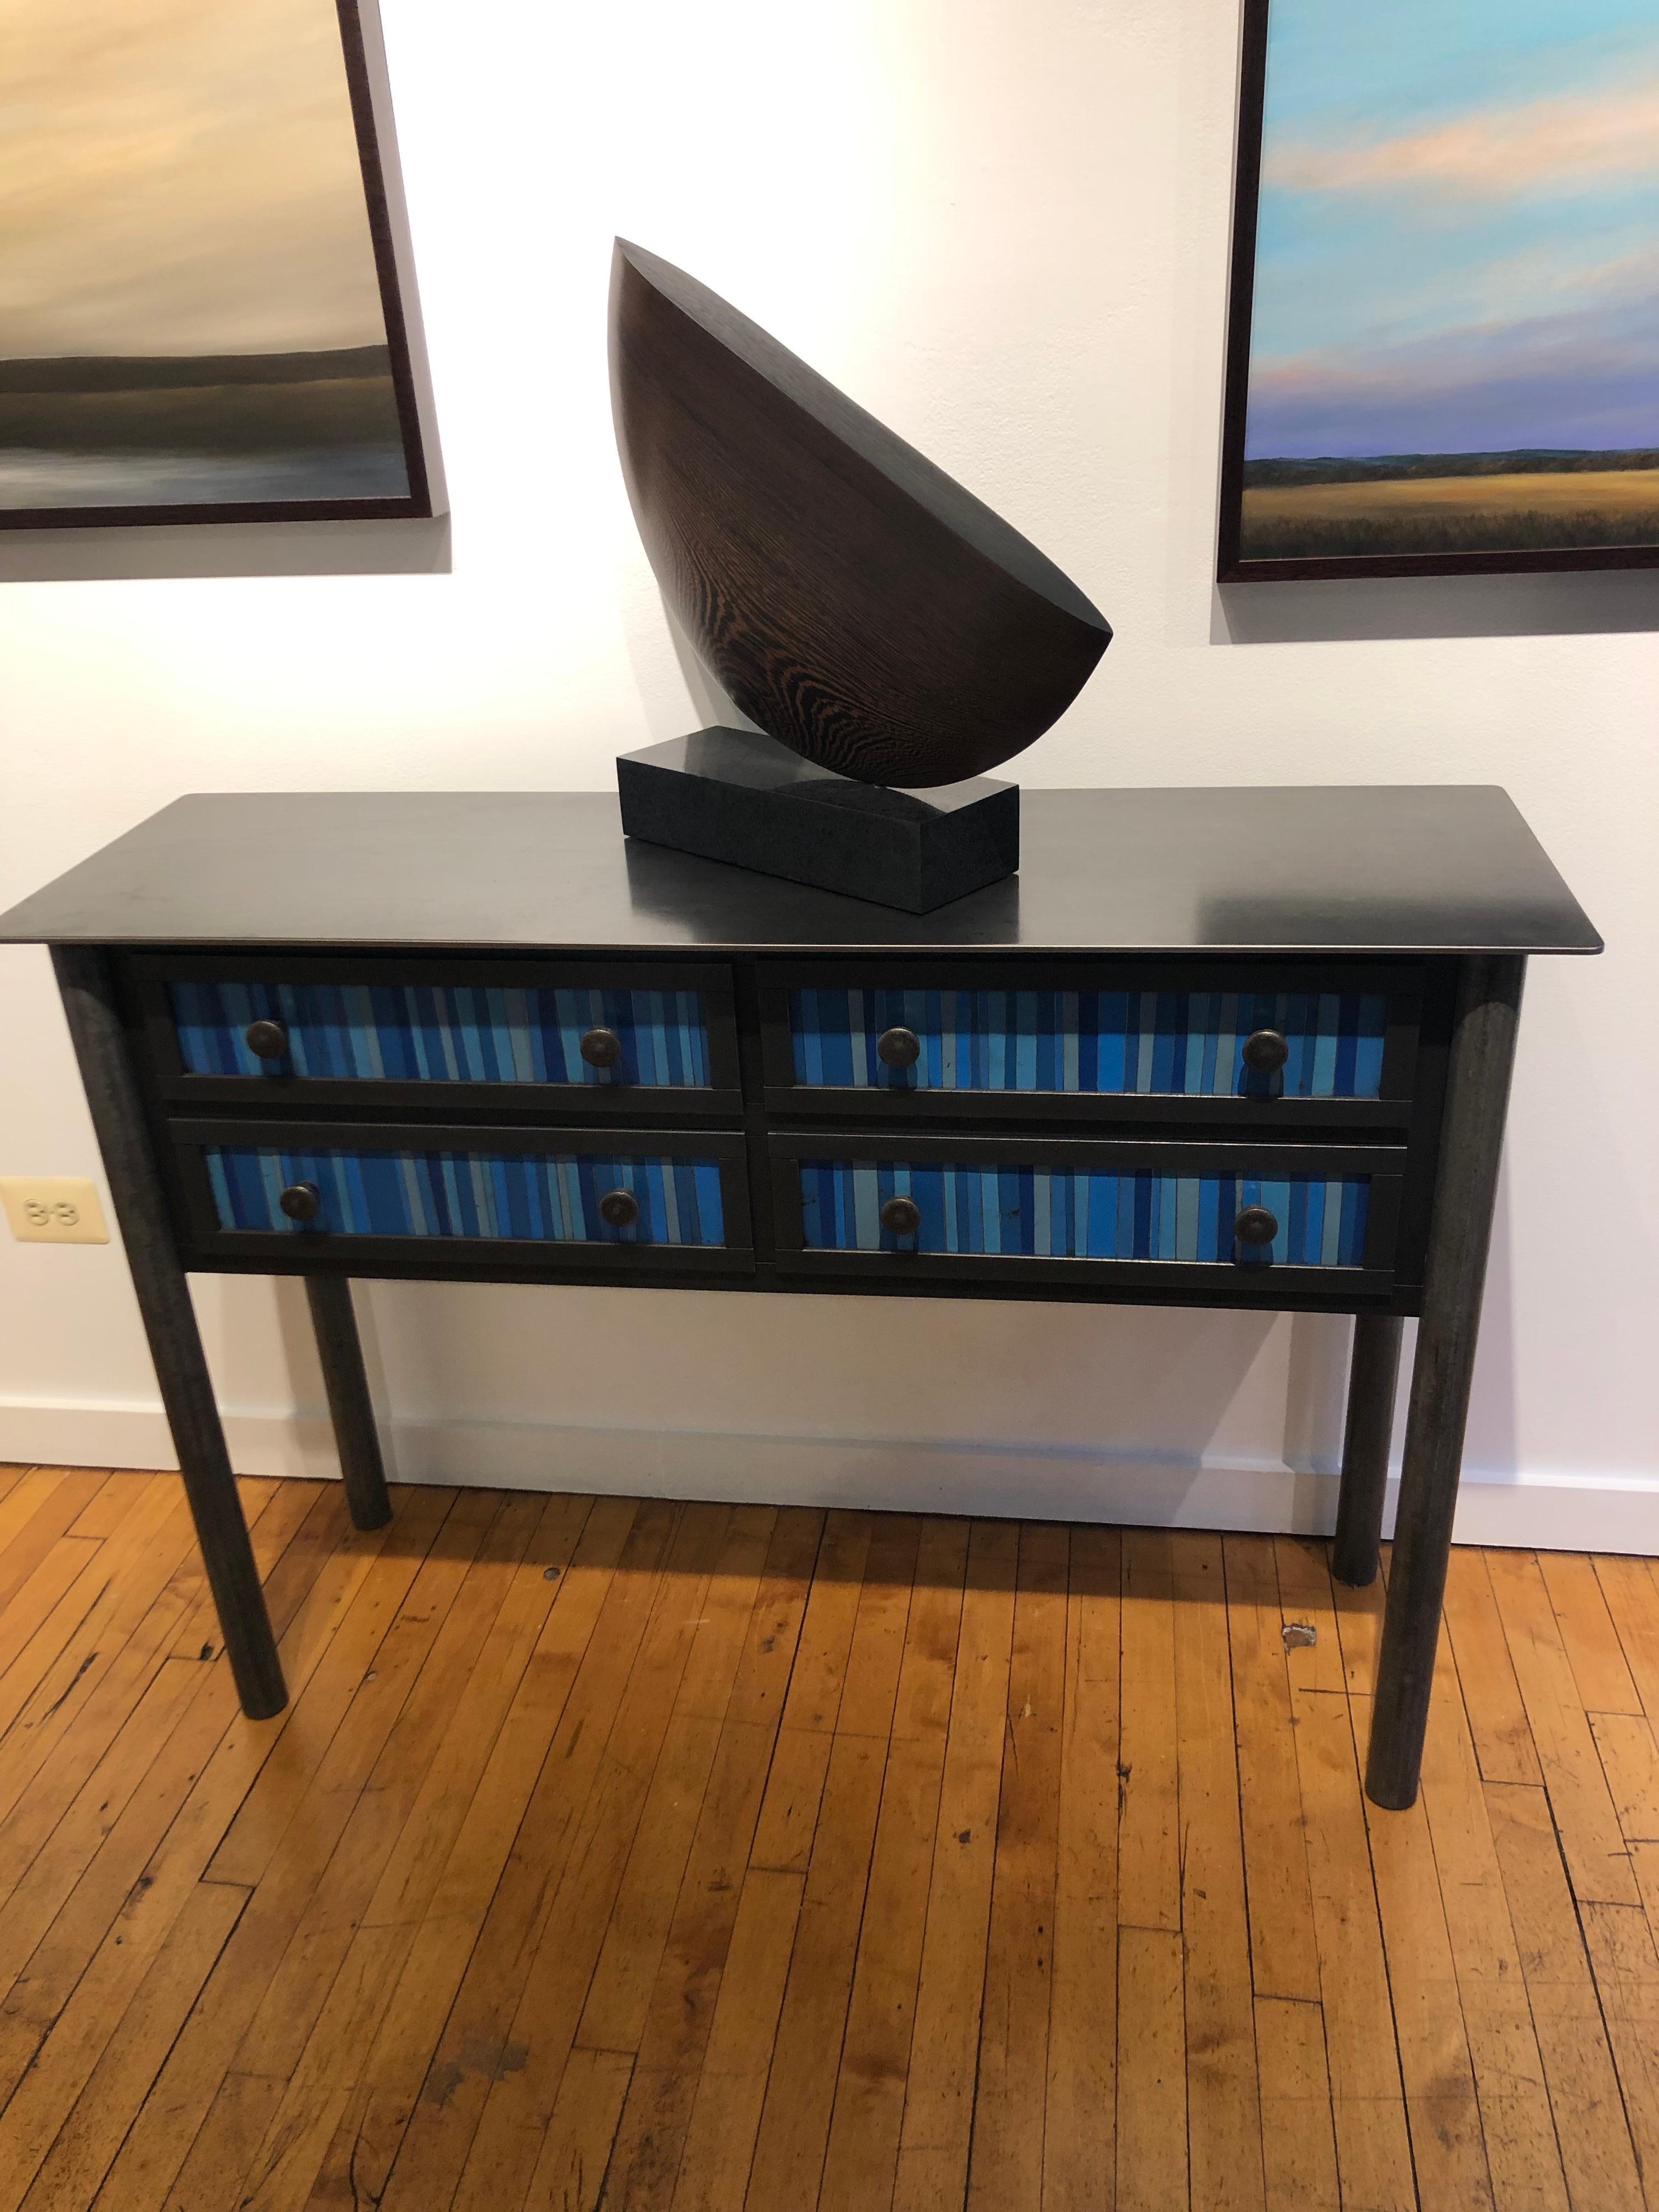 This totally functional modern industrial cabinet is created from hot-rolled steel and found painted panels. The panels on the drawer fronts and sides are created from strips of blue painted salvaged and recycled steel. This unique custom piece is a